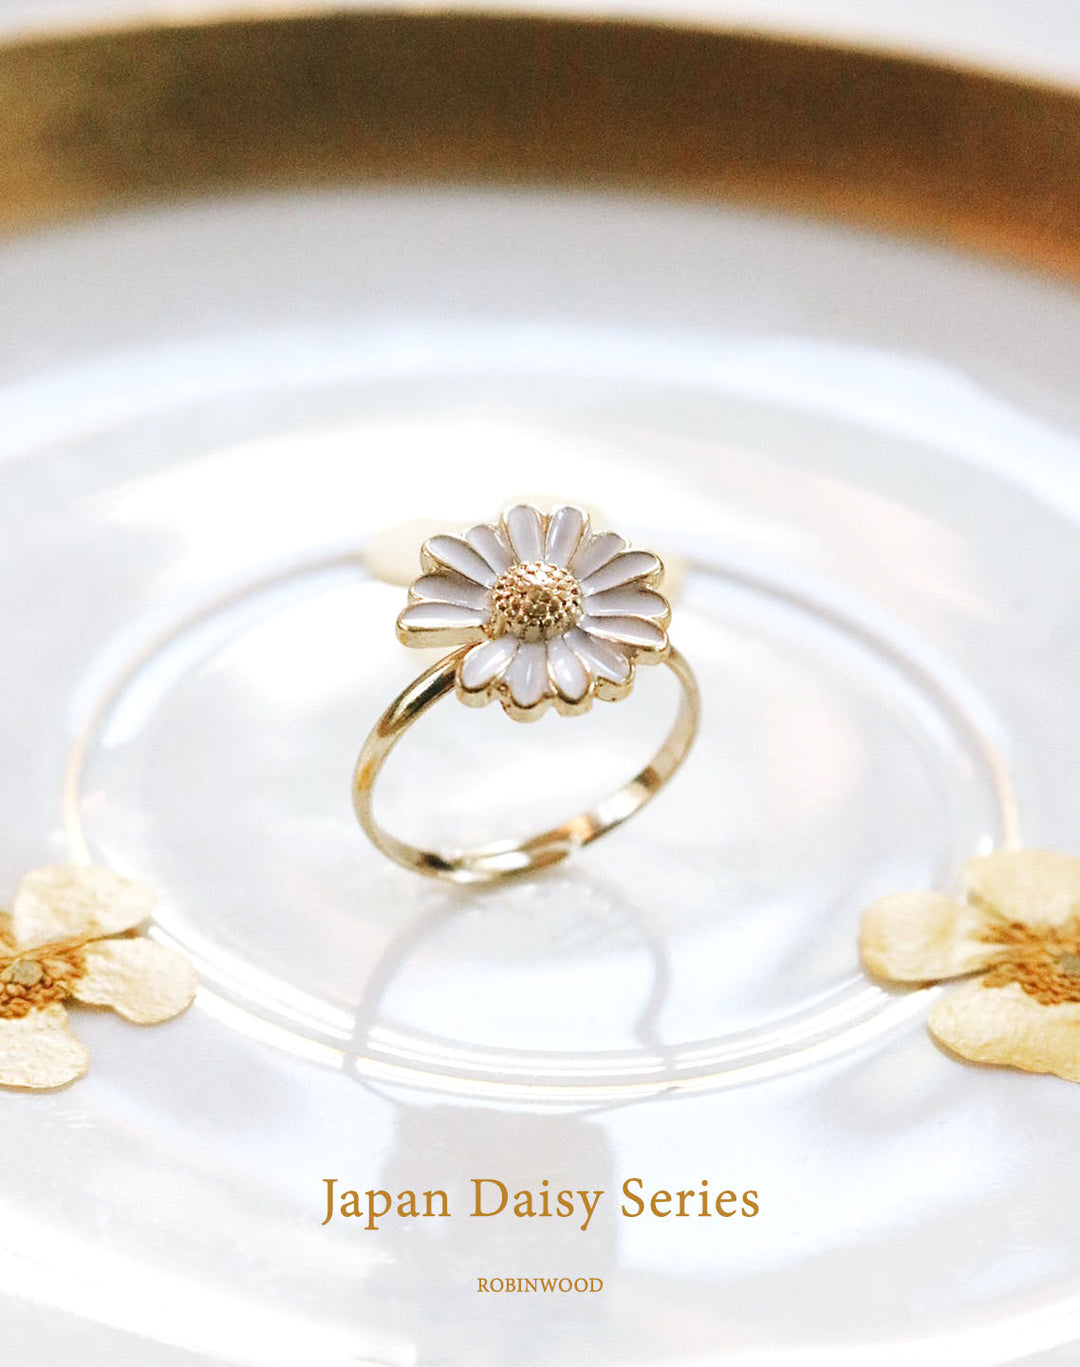 " Limited Collection's " & " Japan Daisy Ring ", Japanese Series,Adjustable Size, Robinwood, Promotion Series